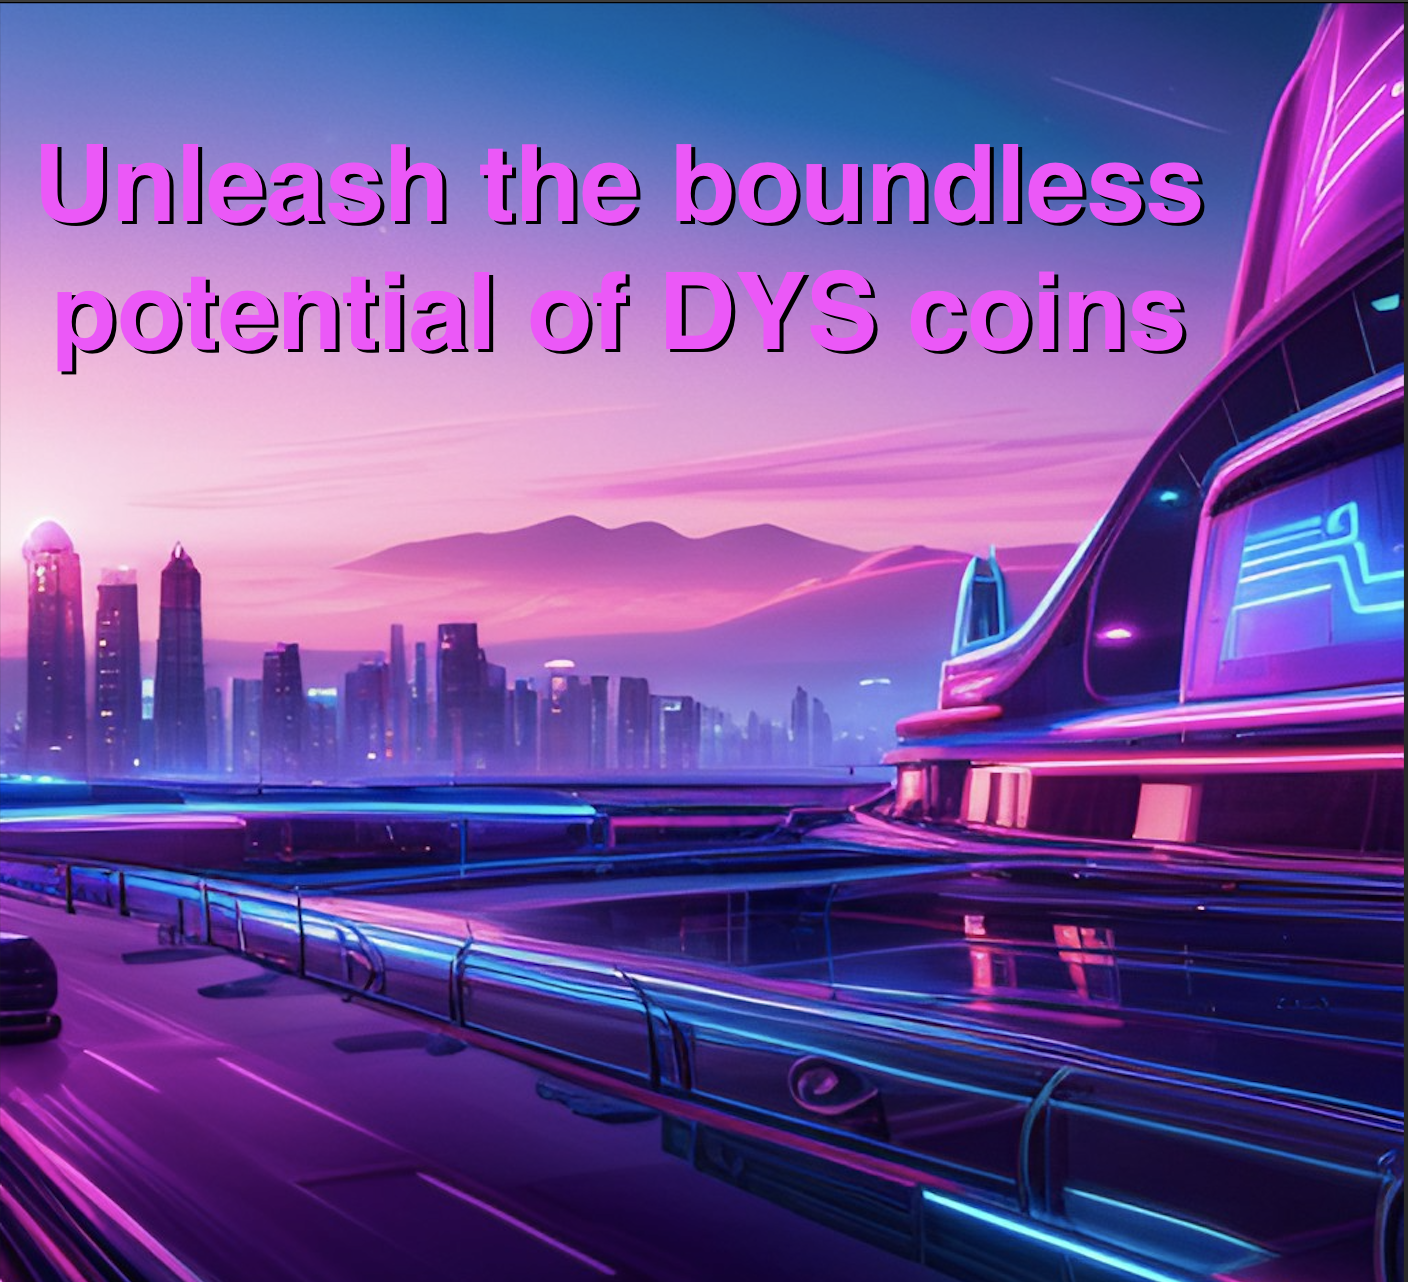 Power of DYS coins